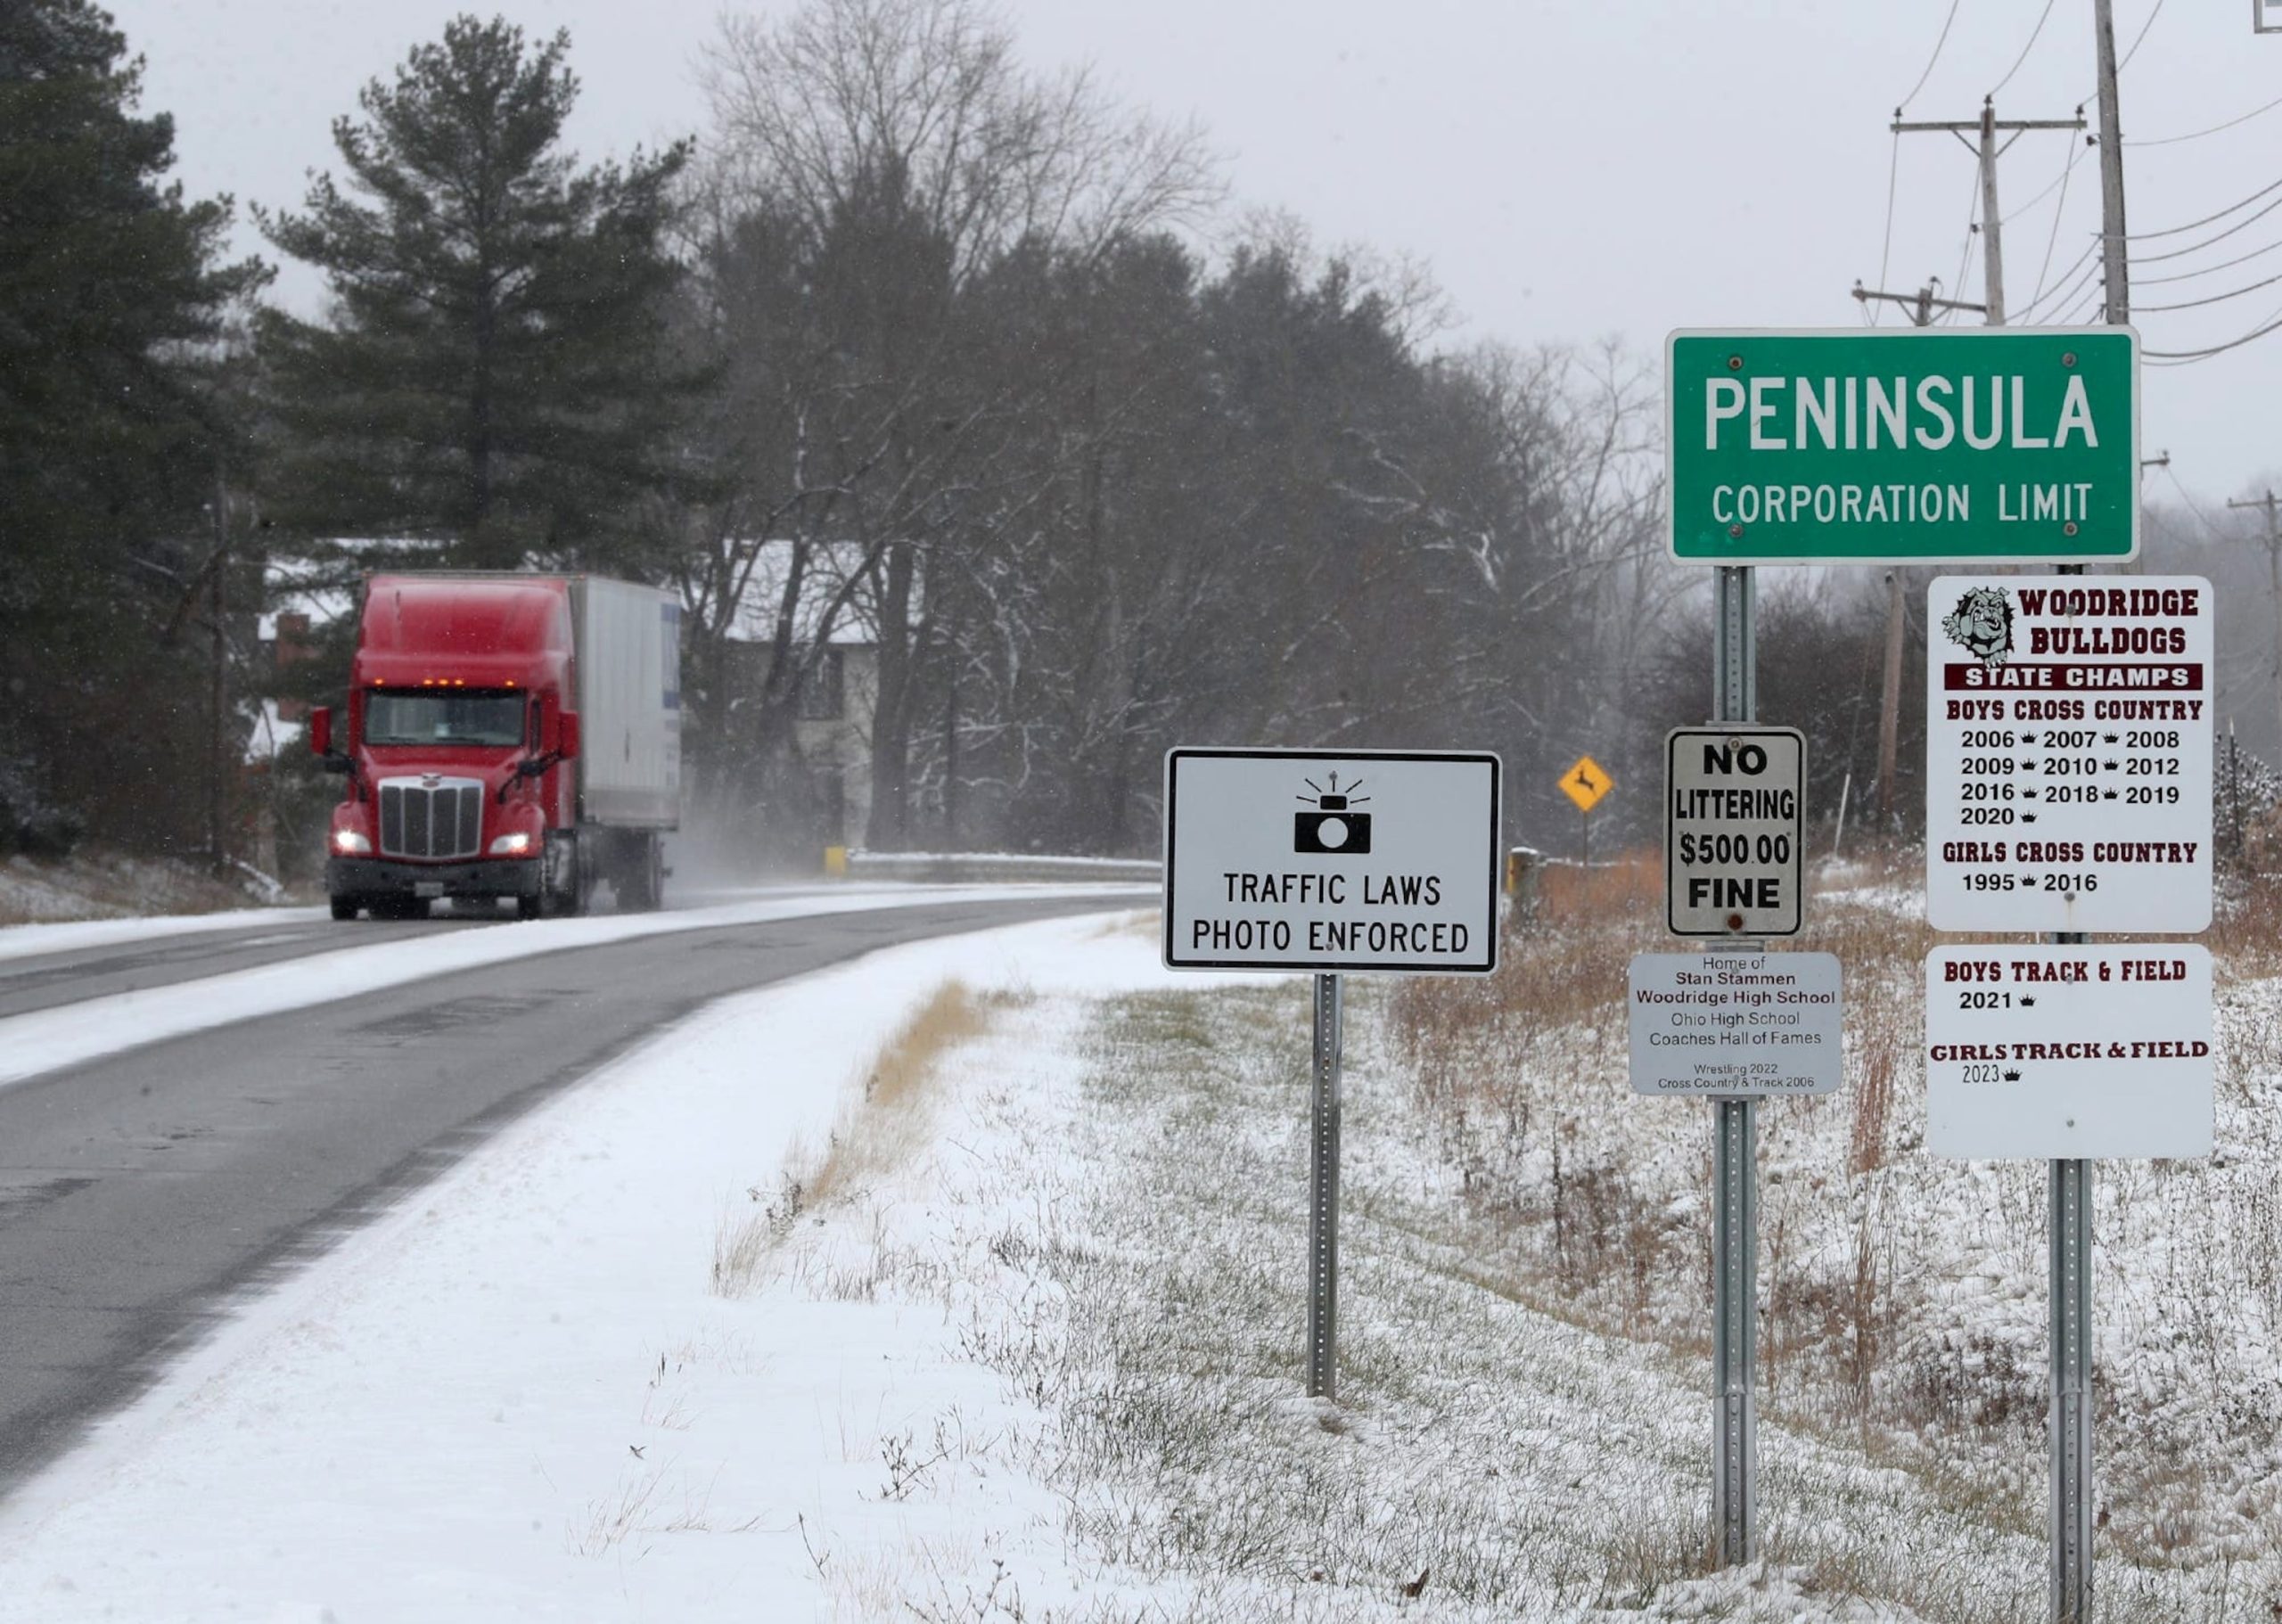 Severe Lake Effect Snowstorm Sweeps Across Ohio to Western New York